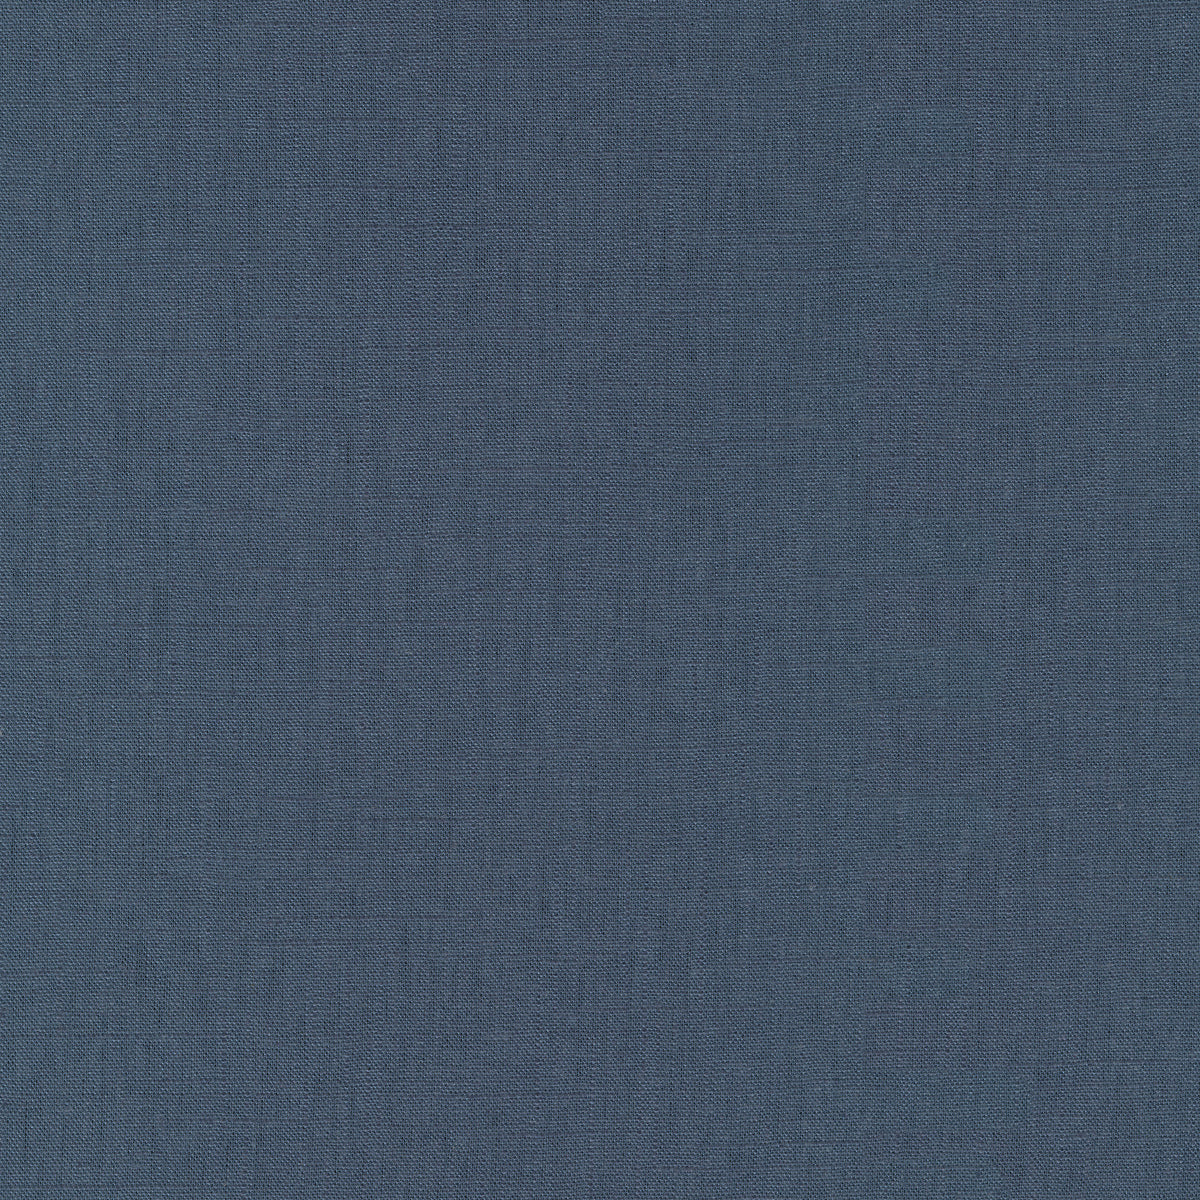 P/K Lifestyles Chester - Baltic 412075 Fabric Swatch